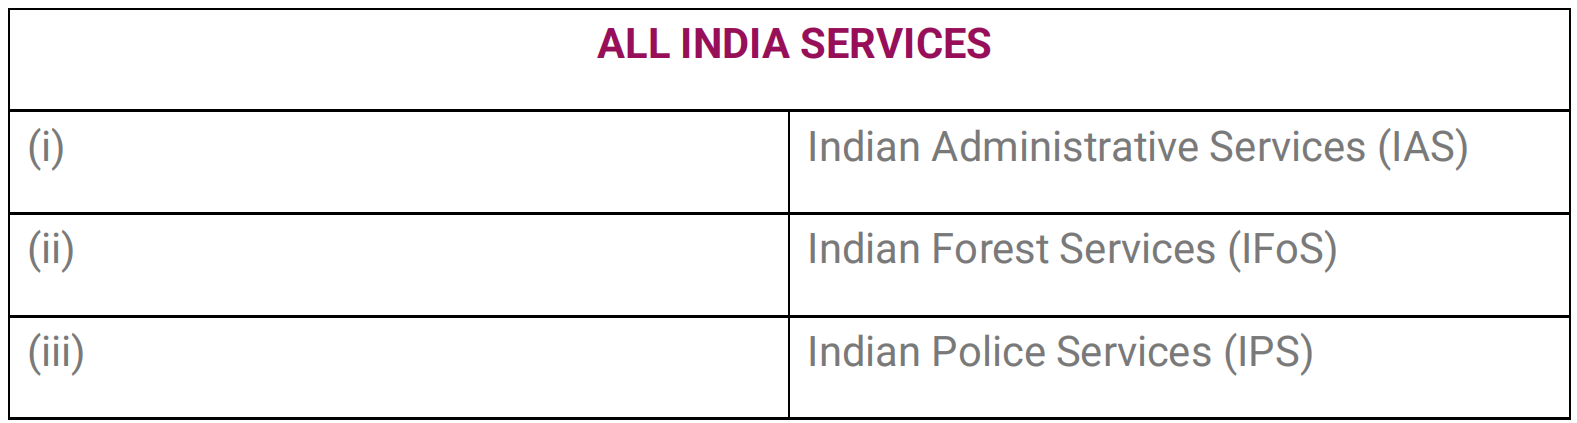 ALL INDIA SERVICES